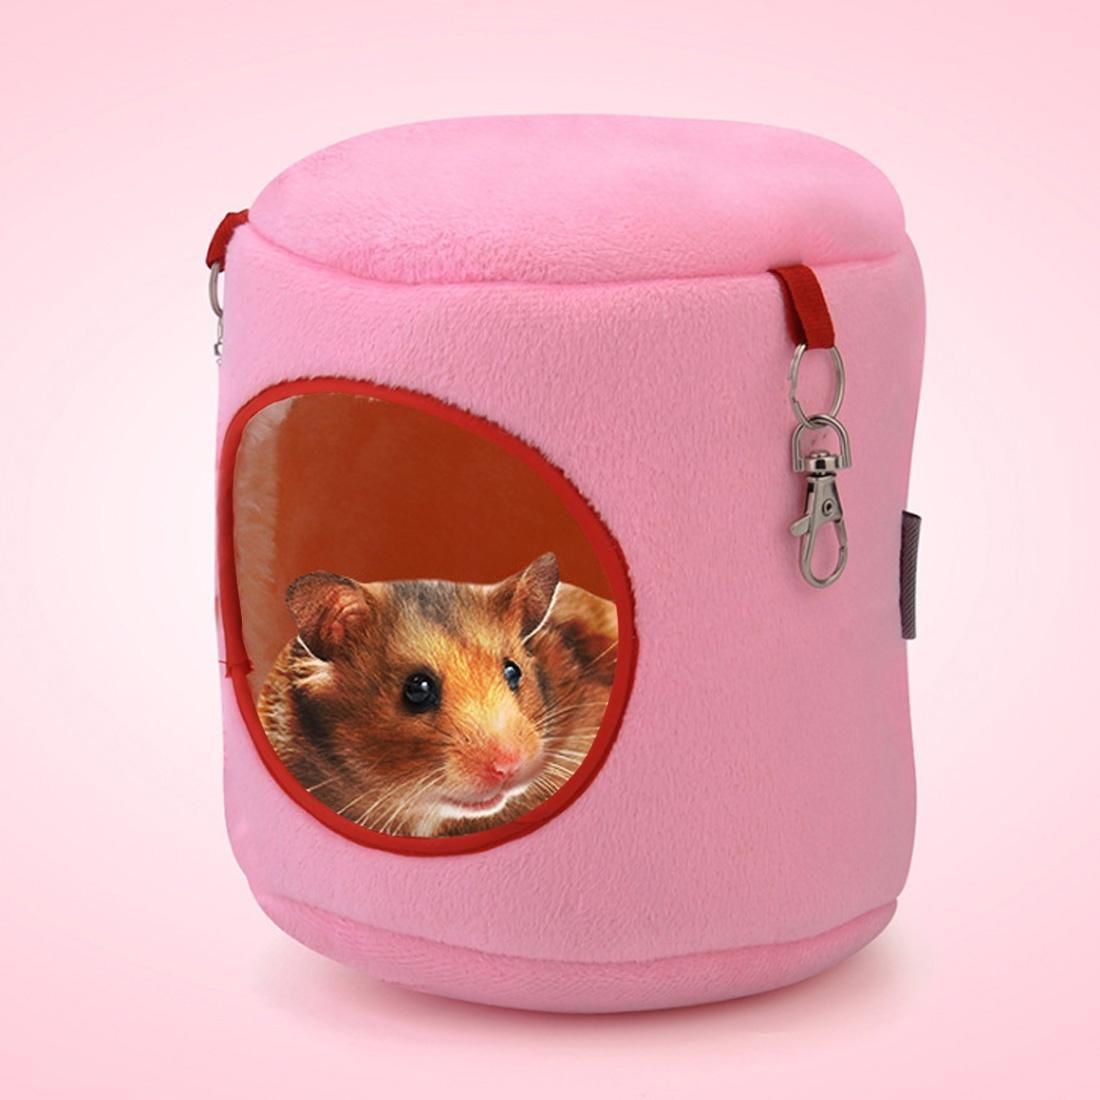 Flannel Cylinder Pet House Warm Hamster Hammock Hanging Bed Small Pets Nest, XL, Size:21*21*21cm (Pink)